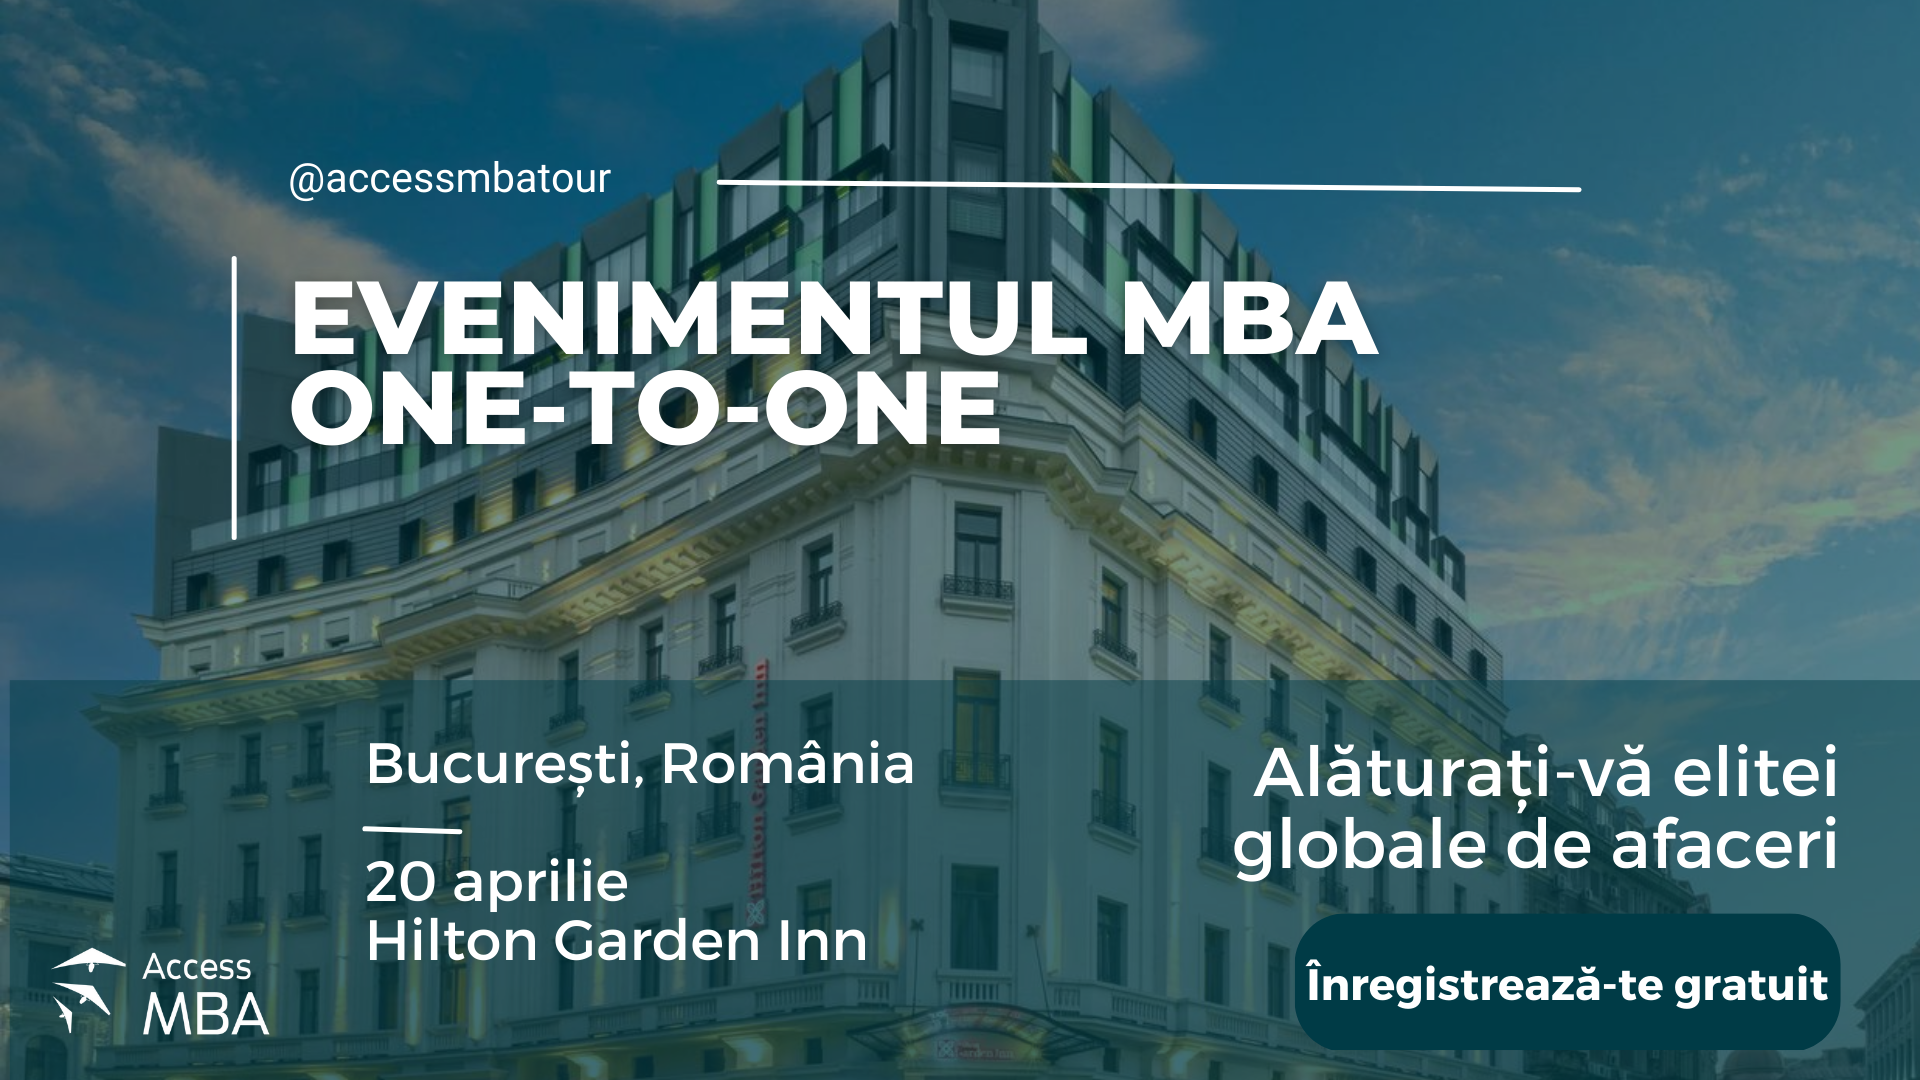 Join the global business elite at Access MBA in Bucharest on April 20th, Bucharest, Bucuresti - Ilfov, Romania